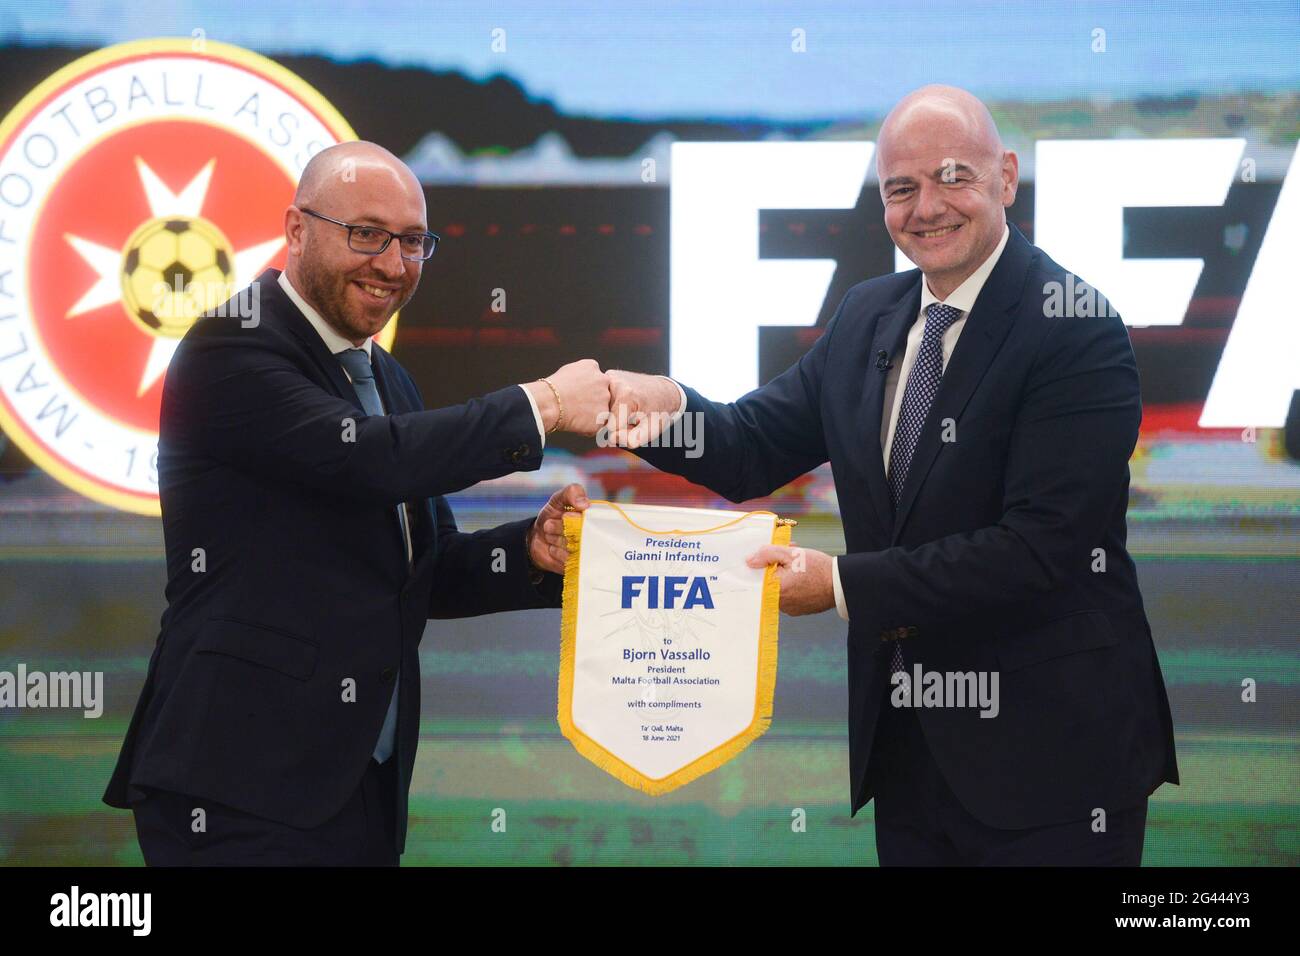 Ta'qali, Malta. 18th June, 2021. FIFA President Gianni Infantino (R) and president of Malta Football Association Bjorn Vassallo are seen to take photo during a press conference in Ta'Qali, Malta, June 18, 2021. Gianni Infantino visited Malta on Friday on an invitation of Malta Football Association President Bjorn Vassallo to hold bilateral discussions on the development of Maltese football and how Malta can contribute further to the international football community. Credit: Jonathan Borg/Xinhua/Alamy Live News Stock Photo